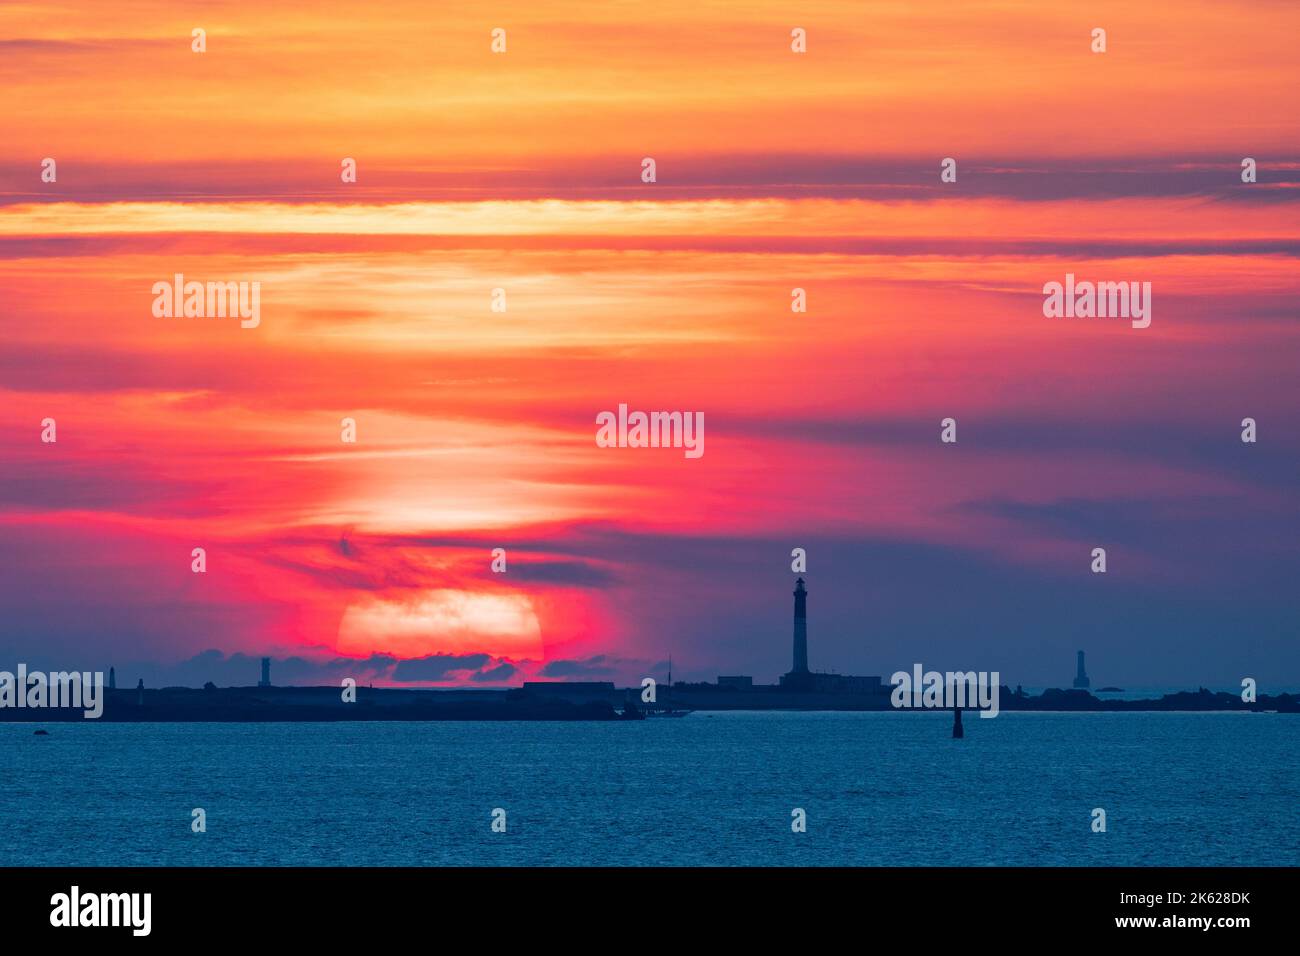 Warm colorful sunset over the Sein island in Brittany, France Stock Photo